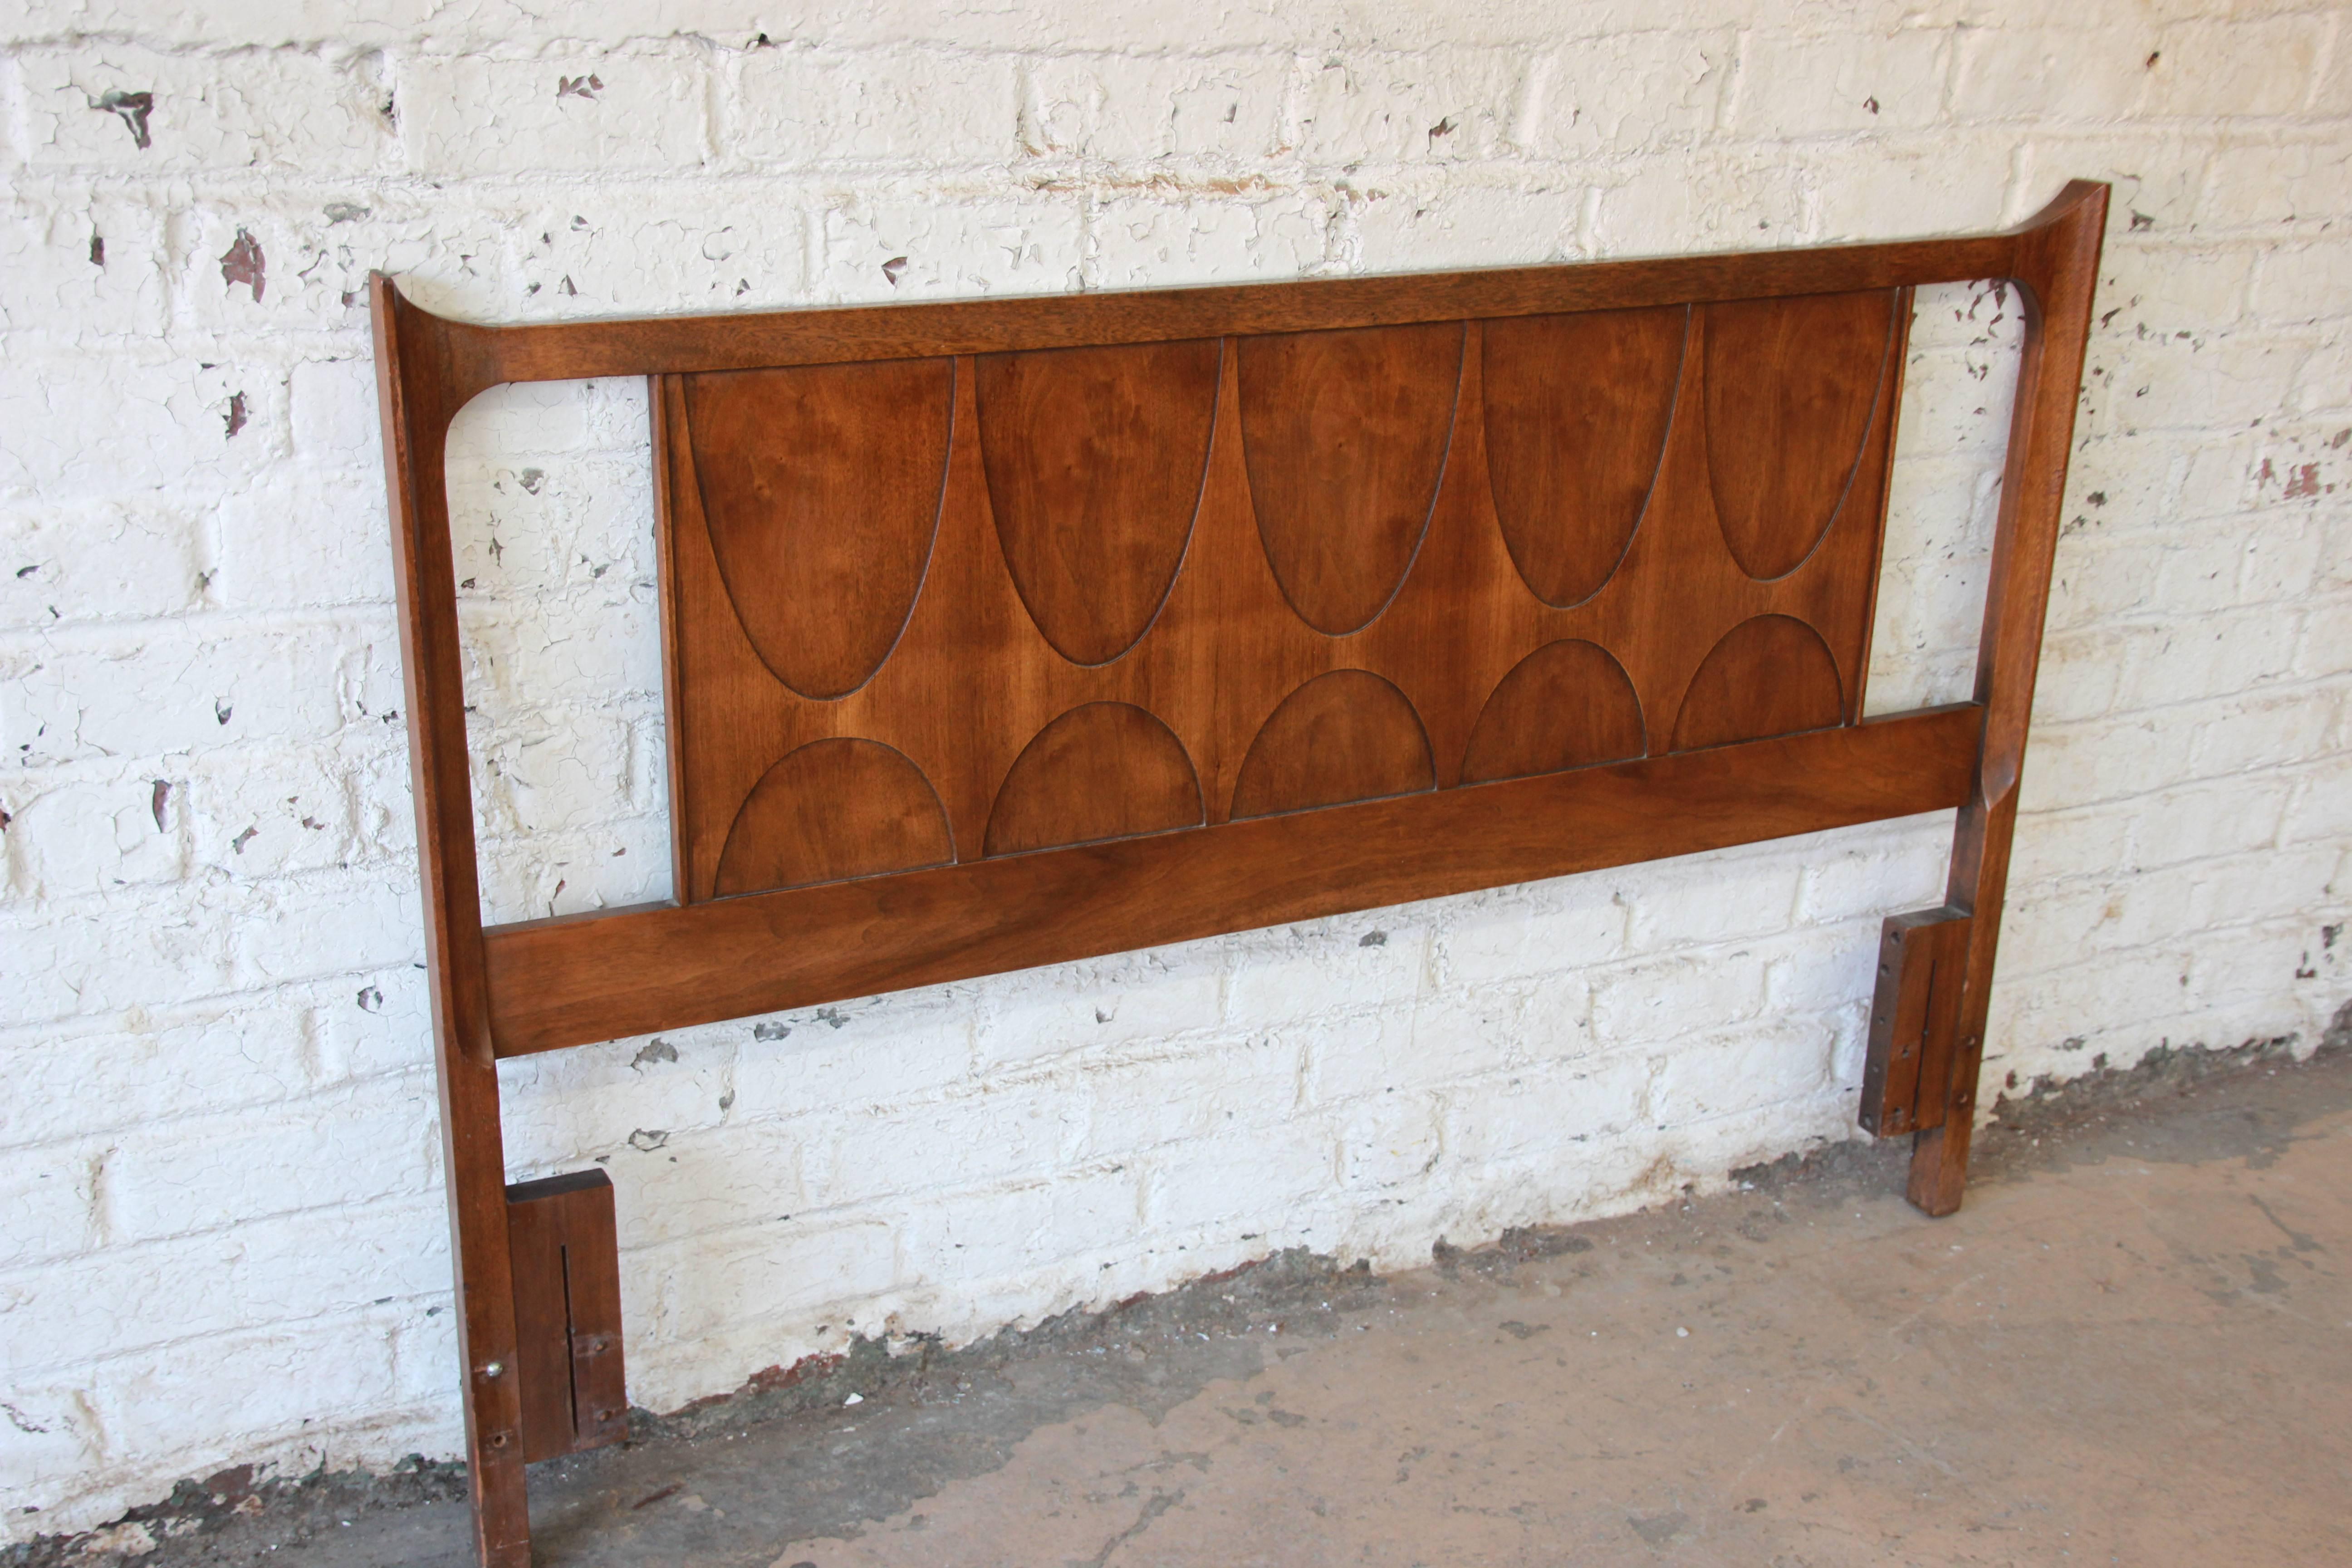 An exceptional Mid-Century Modern sculpted walnut queen or full size headboard by Broyhill Brasilia. The headboard features gorgeous walnut wood grain and classic Brasilia design. It was originally designed for both a queen and full bed. There are